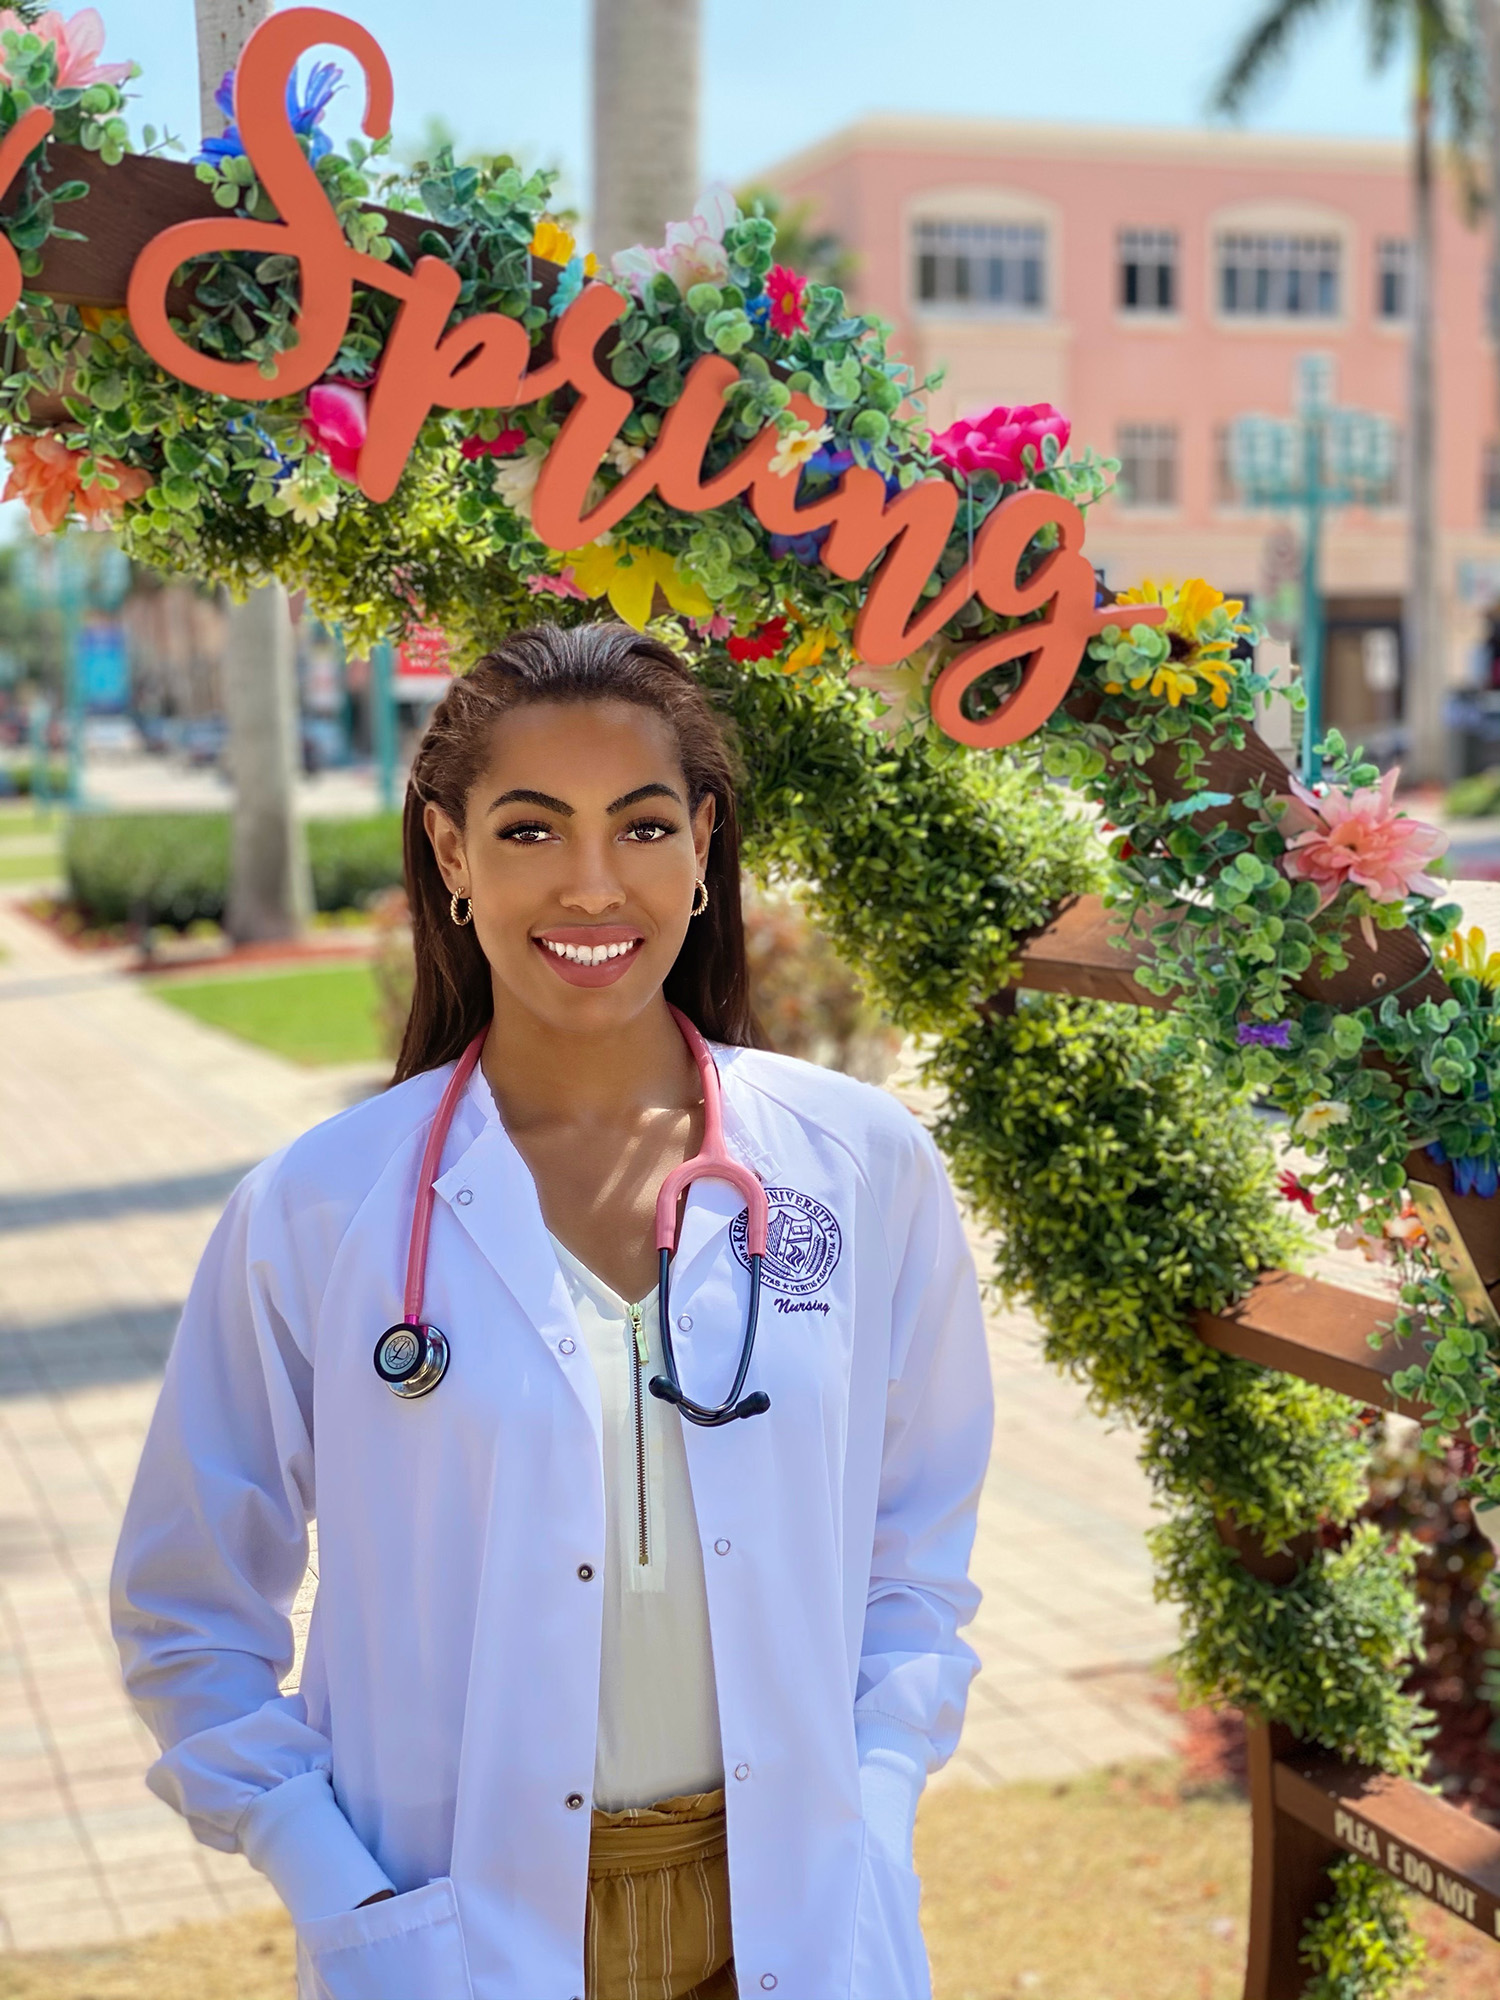 Keiser University Student Finds Calling in Critical Care Nursing Environment